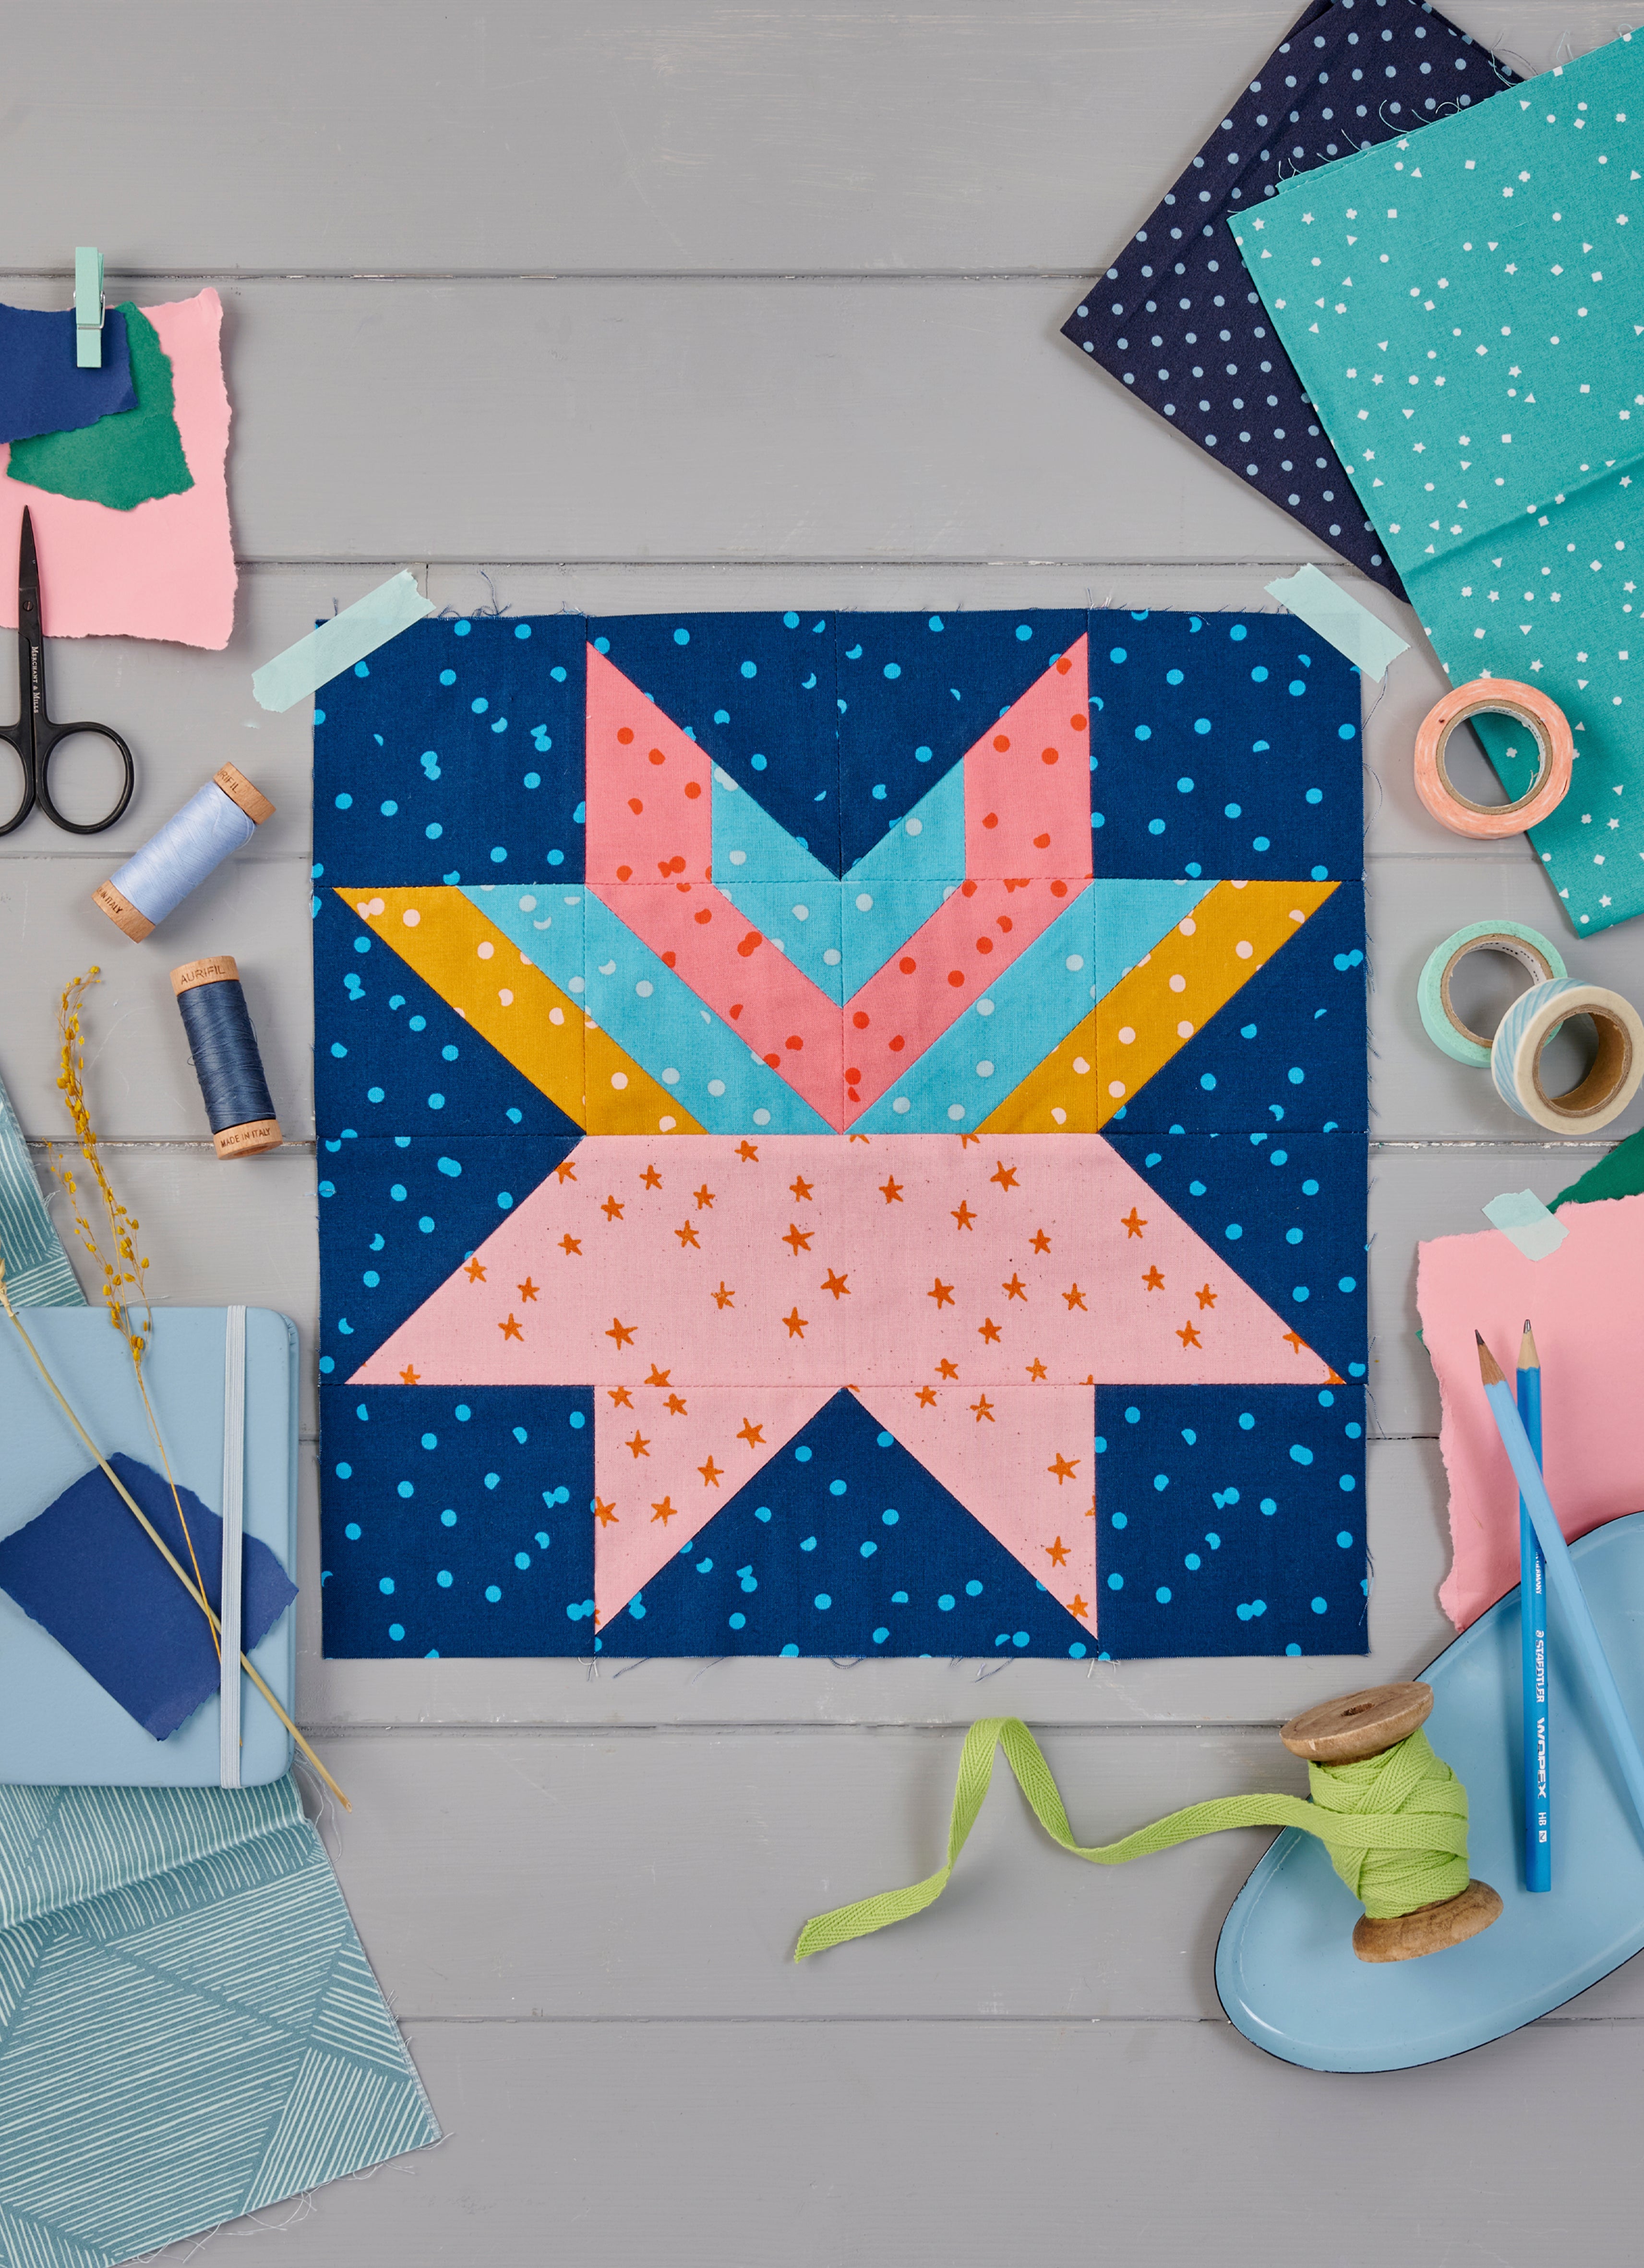 Love Patchwork and Quilting Magazine issue 107 cover featuring The Weekend Quilter Wendy Chow Block of the Month Setting Suns Project